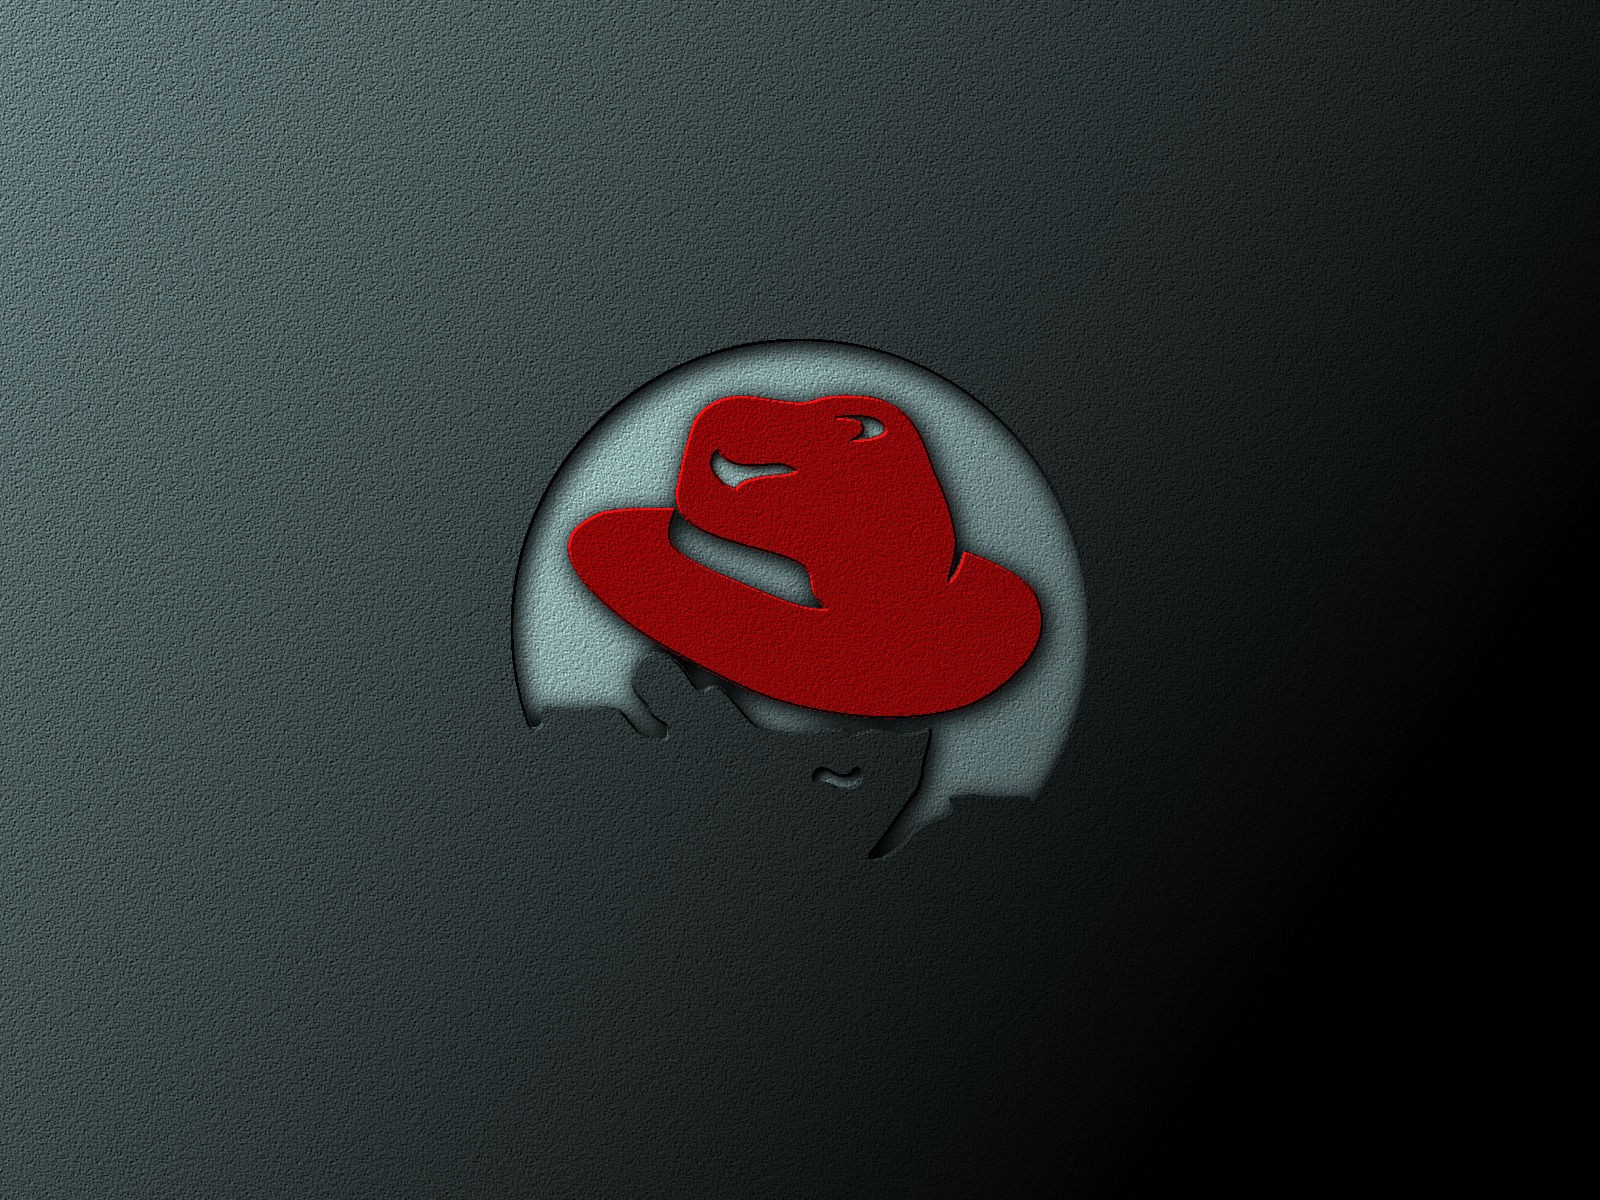 Red hat 7. Редхат линукс. Red hat. Обои Red hat. Red hat Linux рабочий стол.